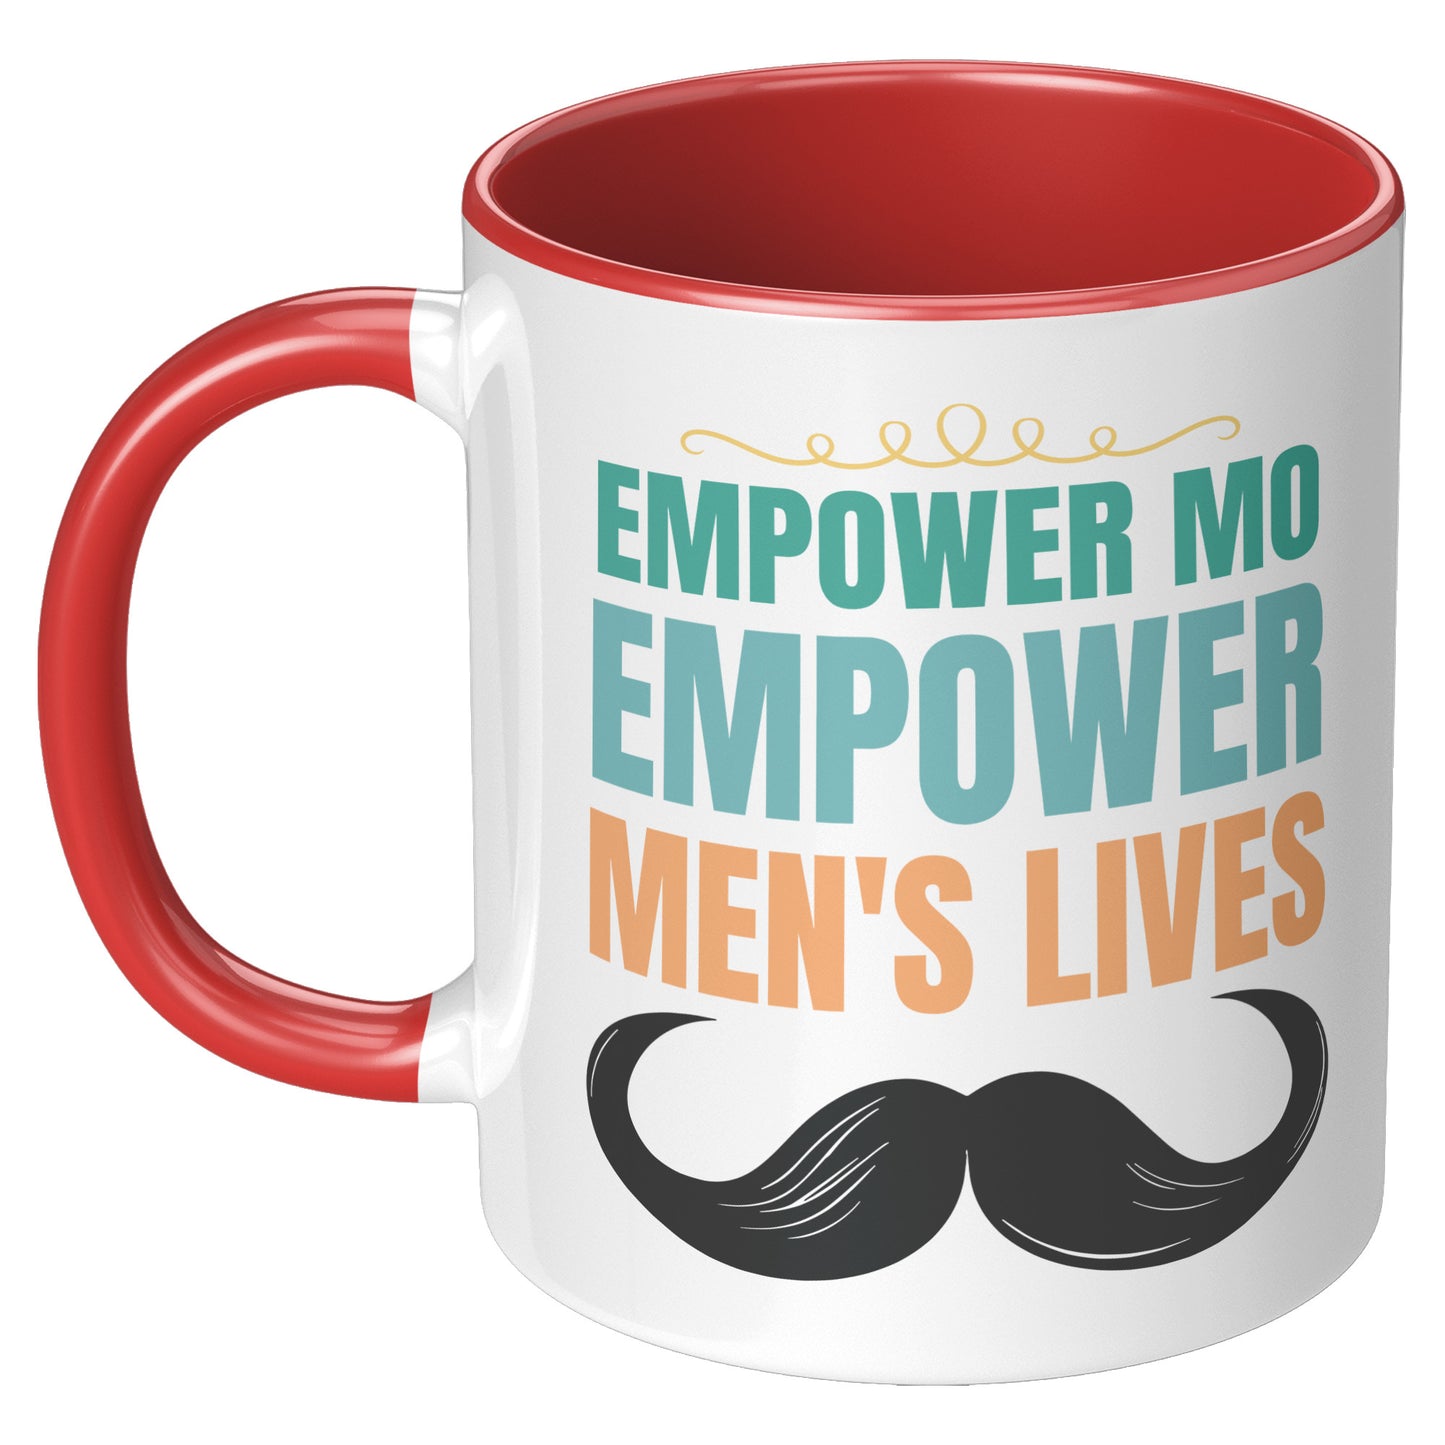 11oz Accent Mug Movember EMPOWER MO EMPOWER MEND"S LIVES Left-Handed